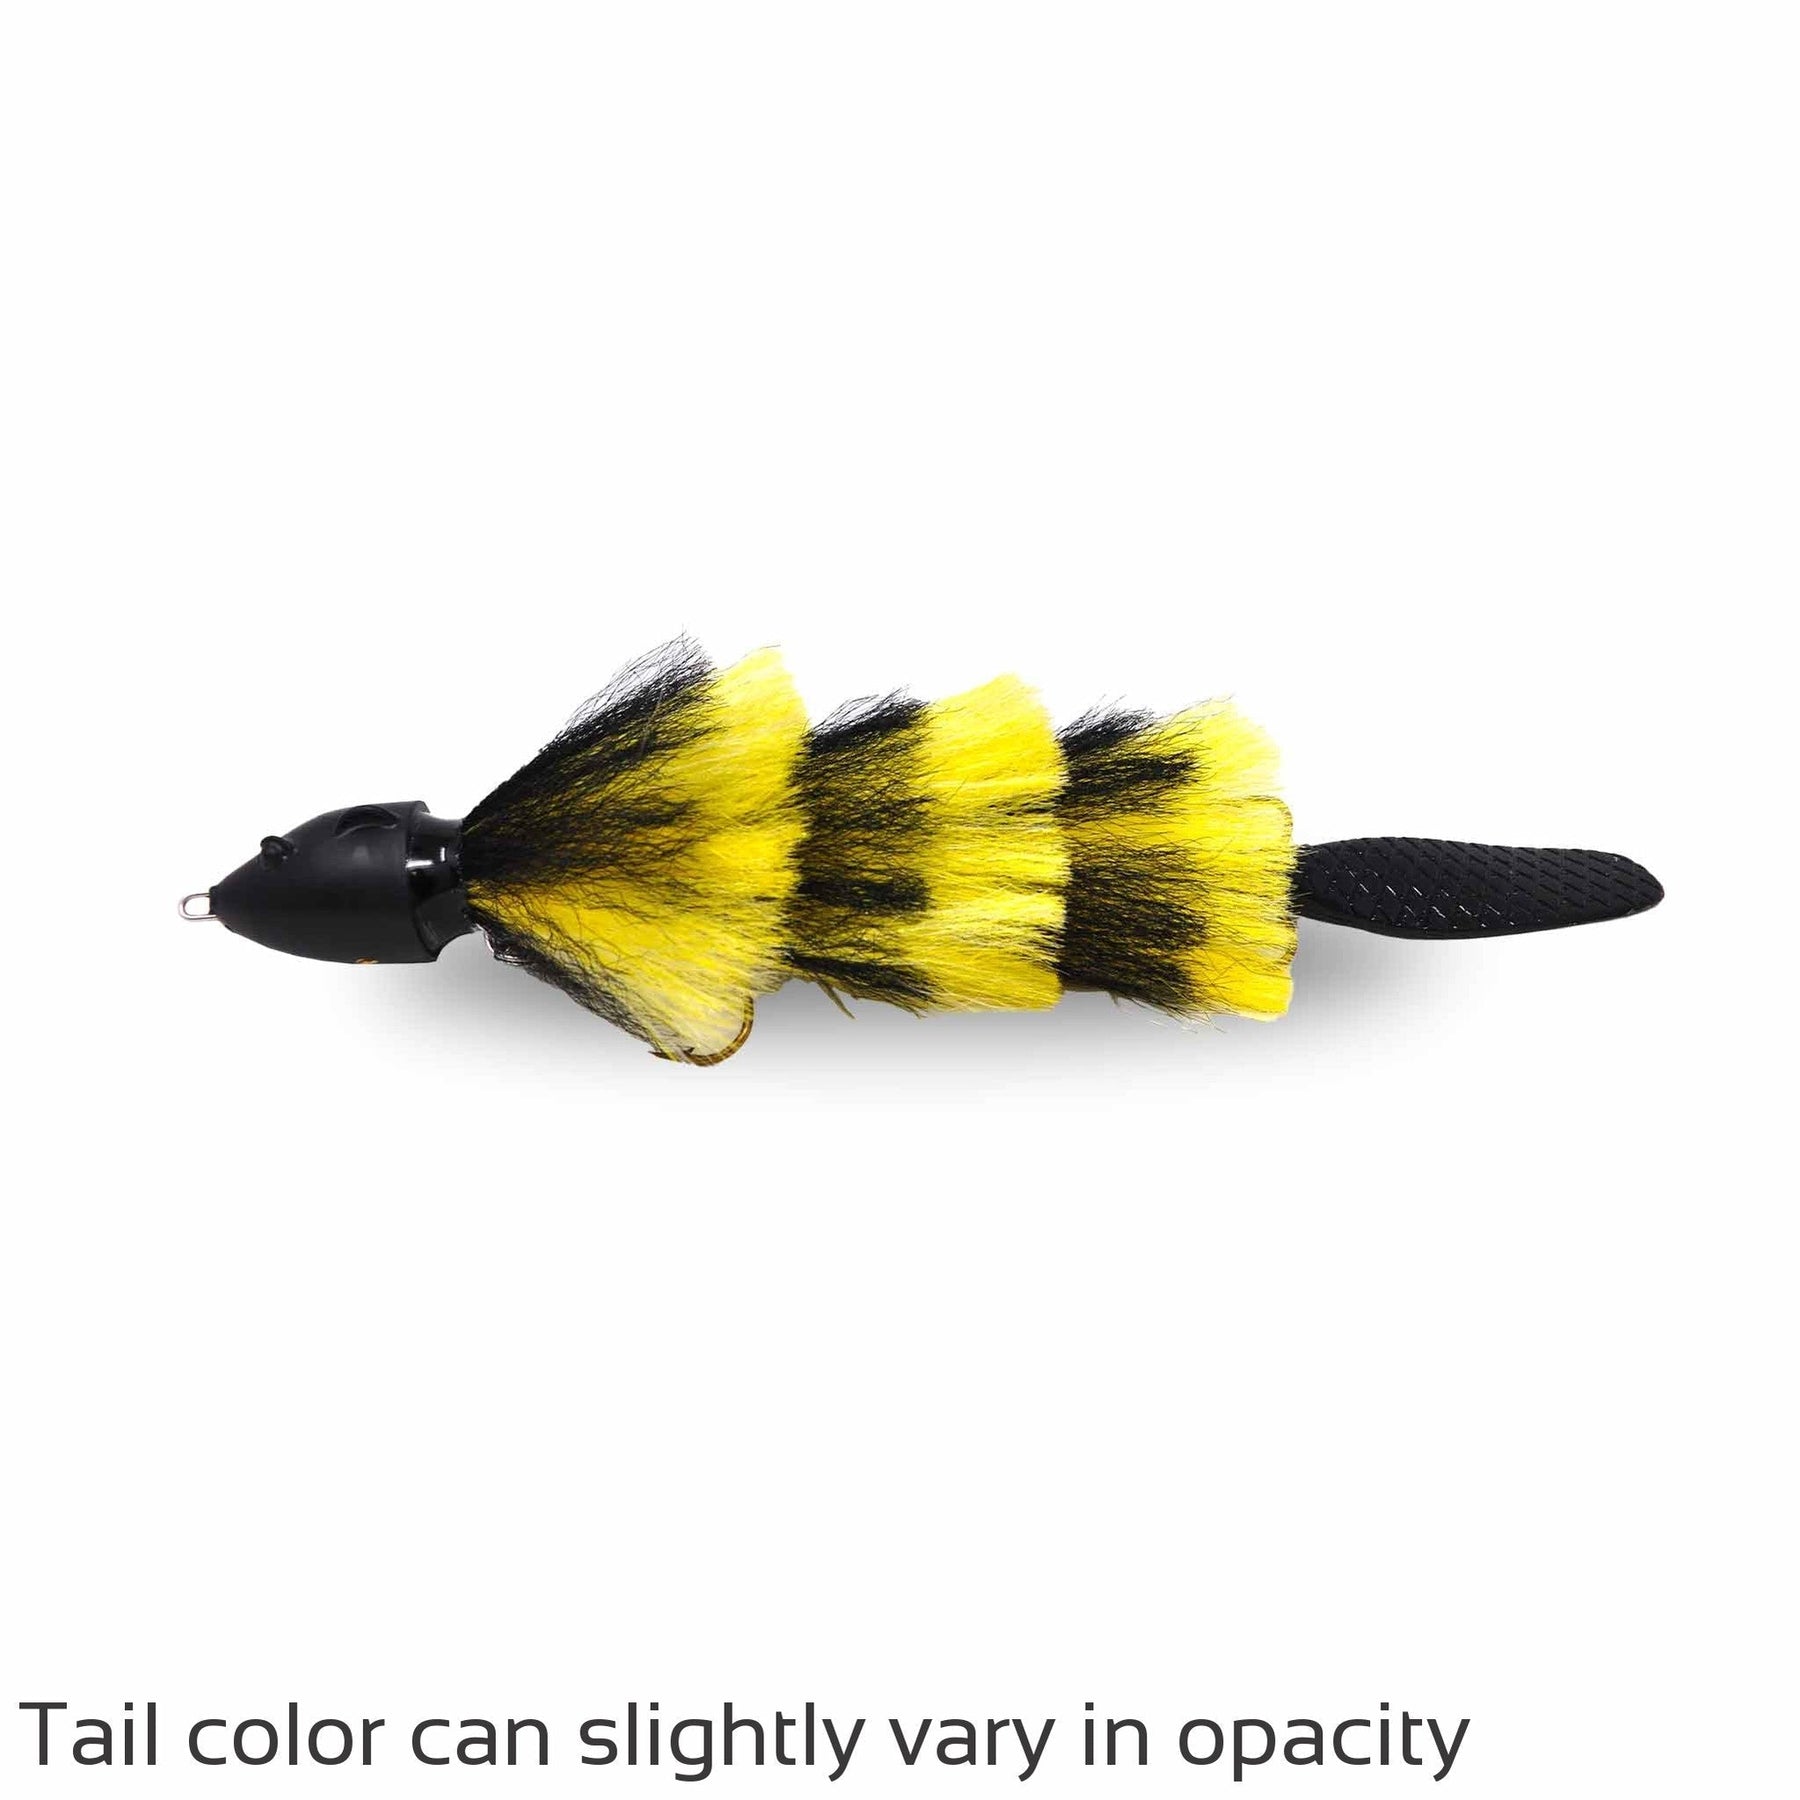 View of Jerk-Glide_Baits Beaver's Baits Baby Beaver Jerkbait Yellow / Black available at EZOKO Pike and Musky Shop